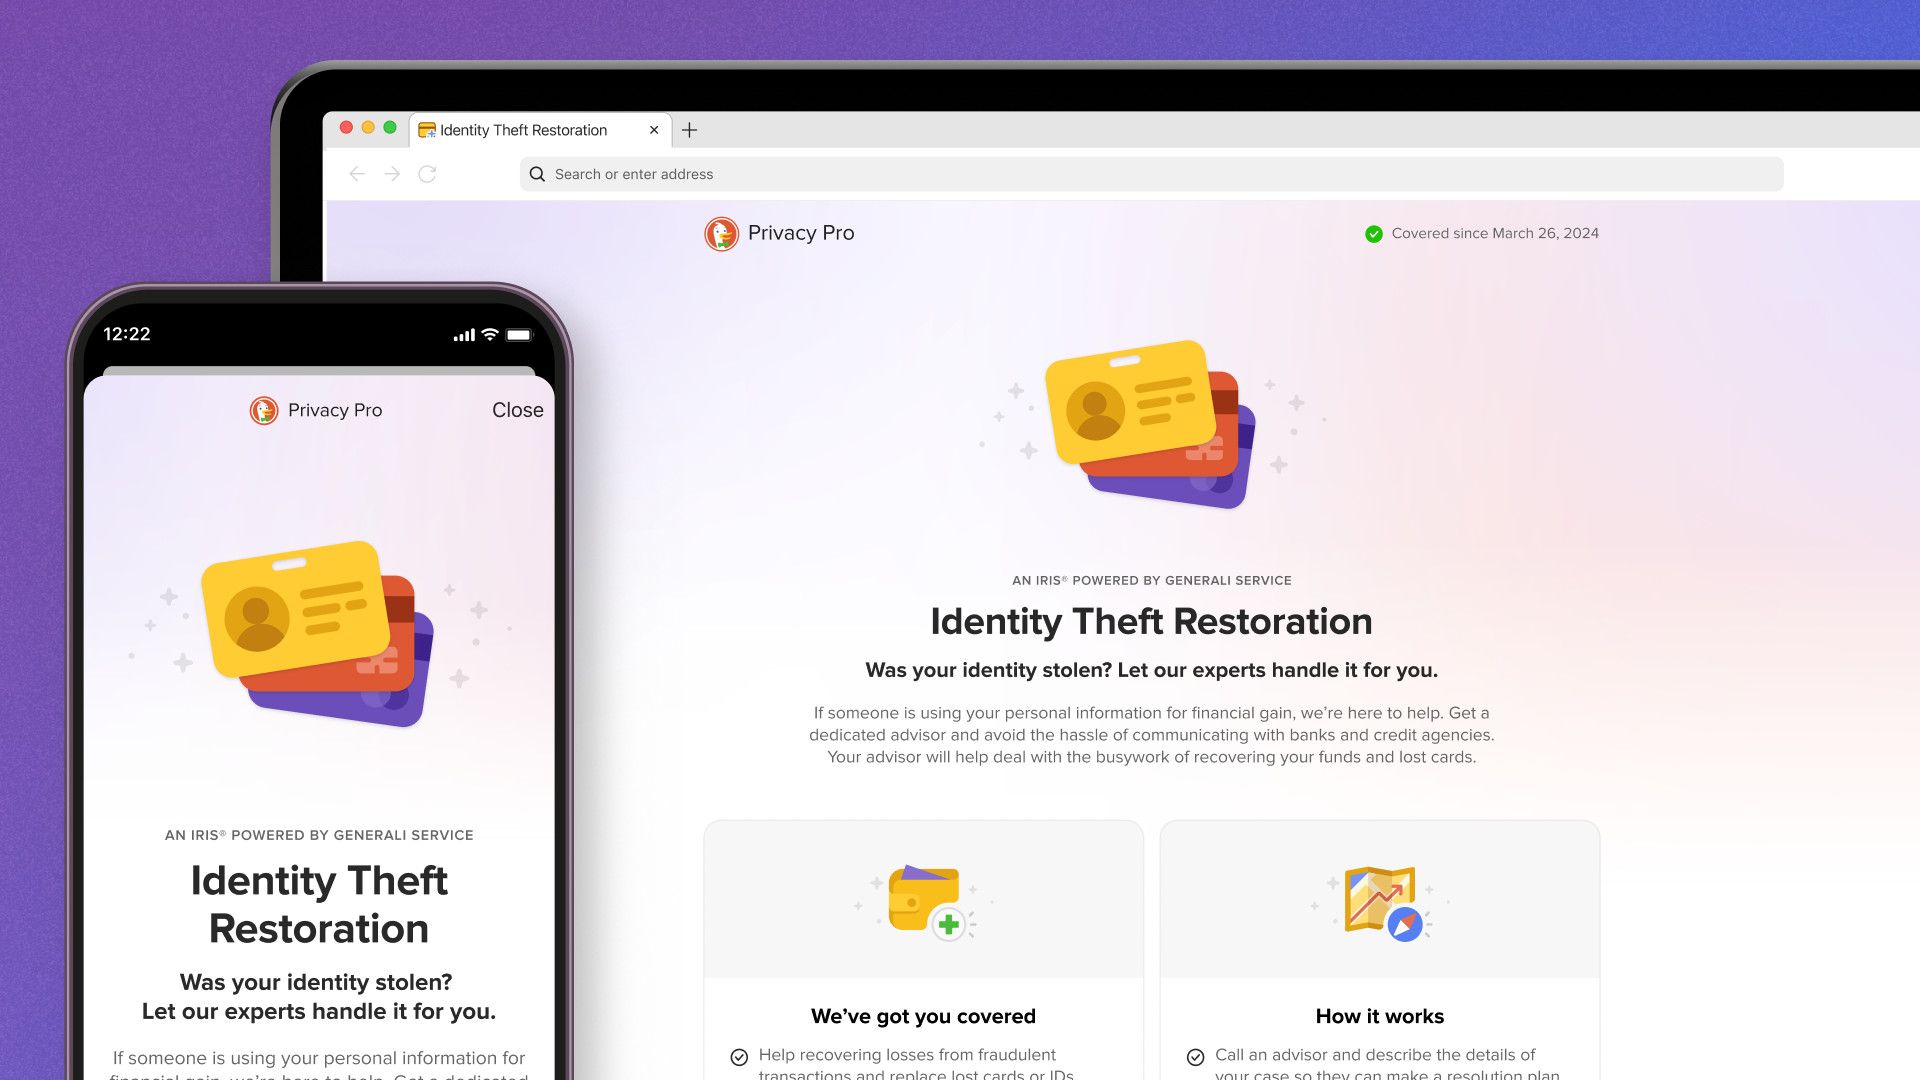 Meet DuckDuckGo Privacy Pro: a 3-in-1 subscription service with VPN, Personal Information Removal, and Identity Theft Restoration